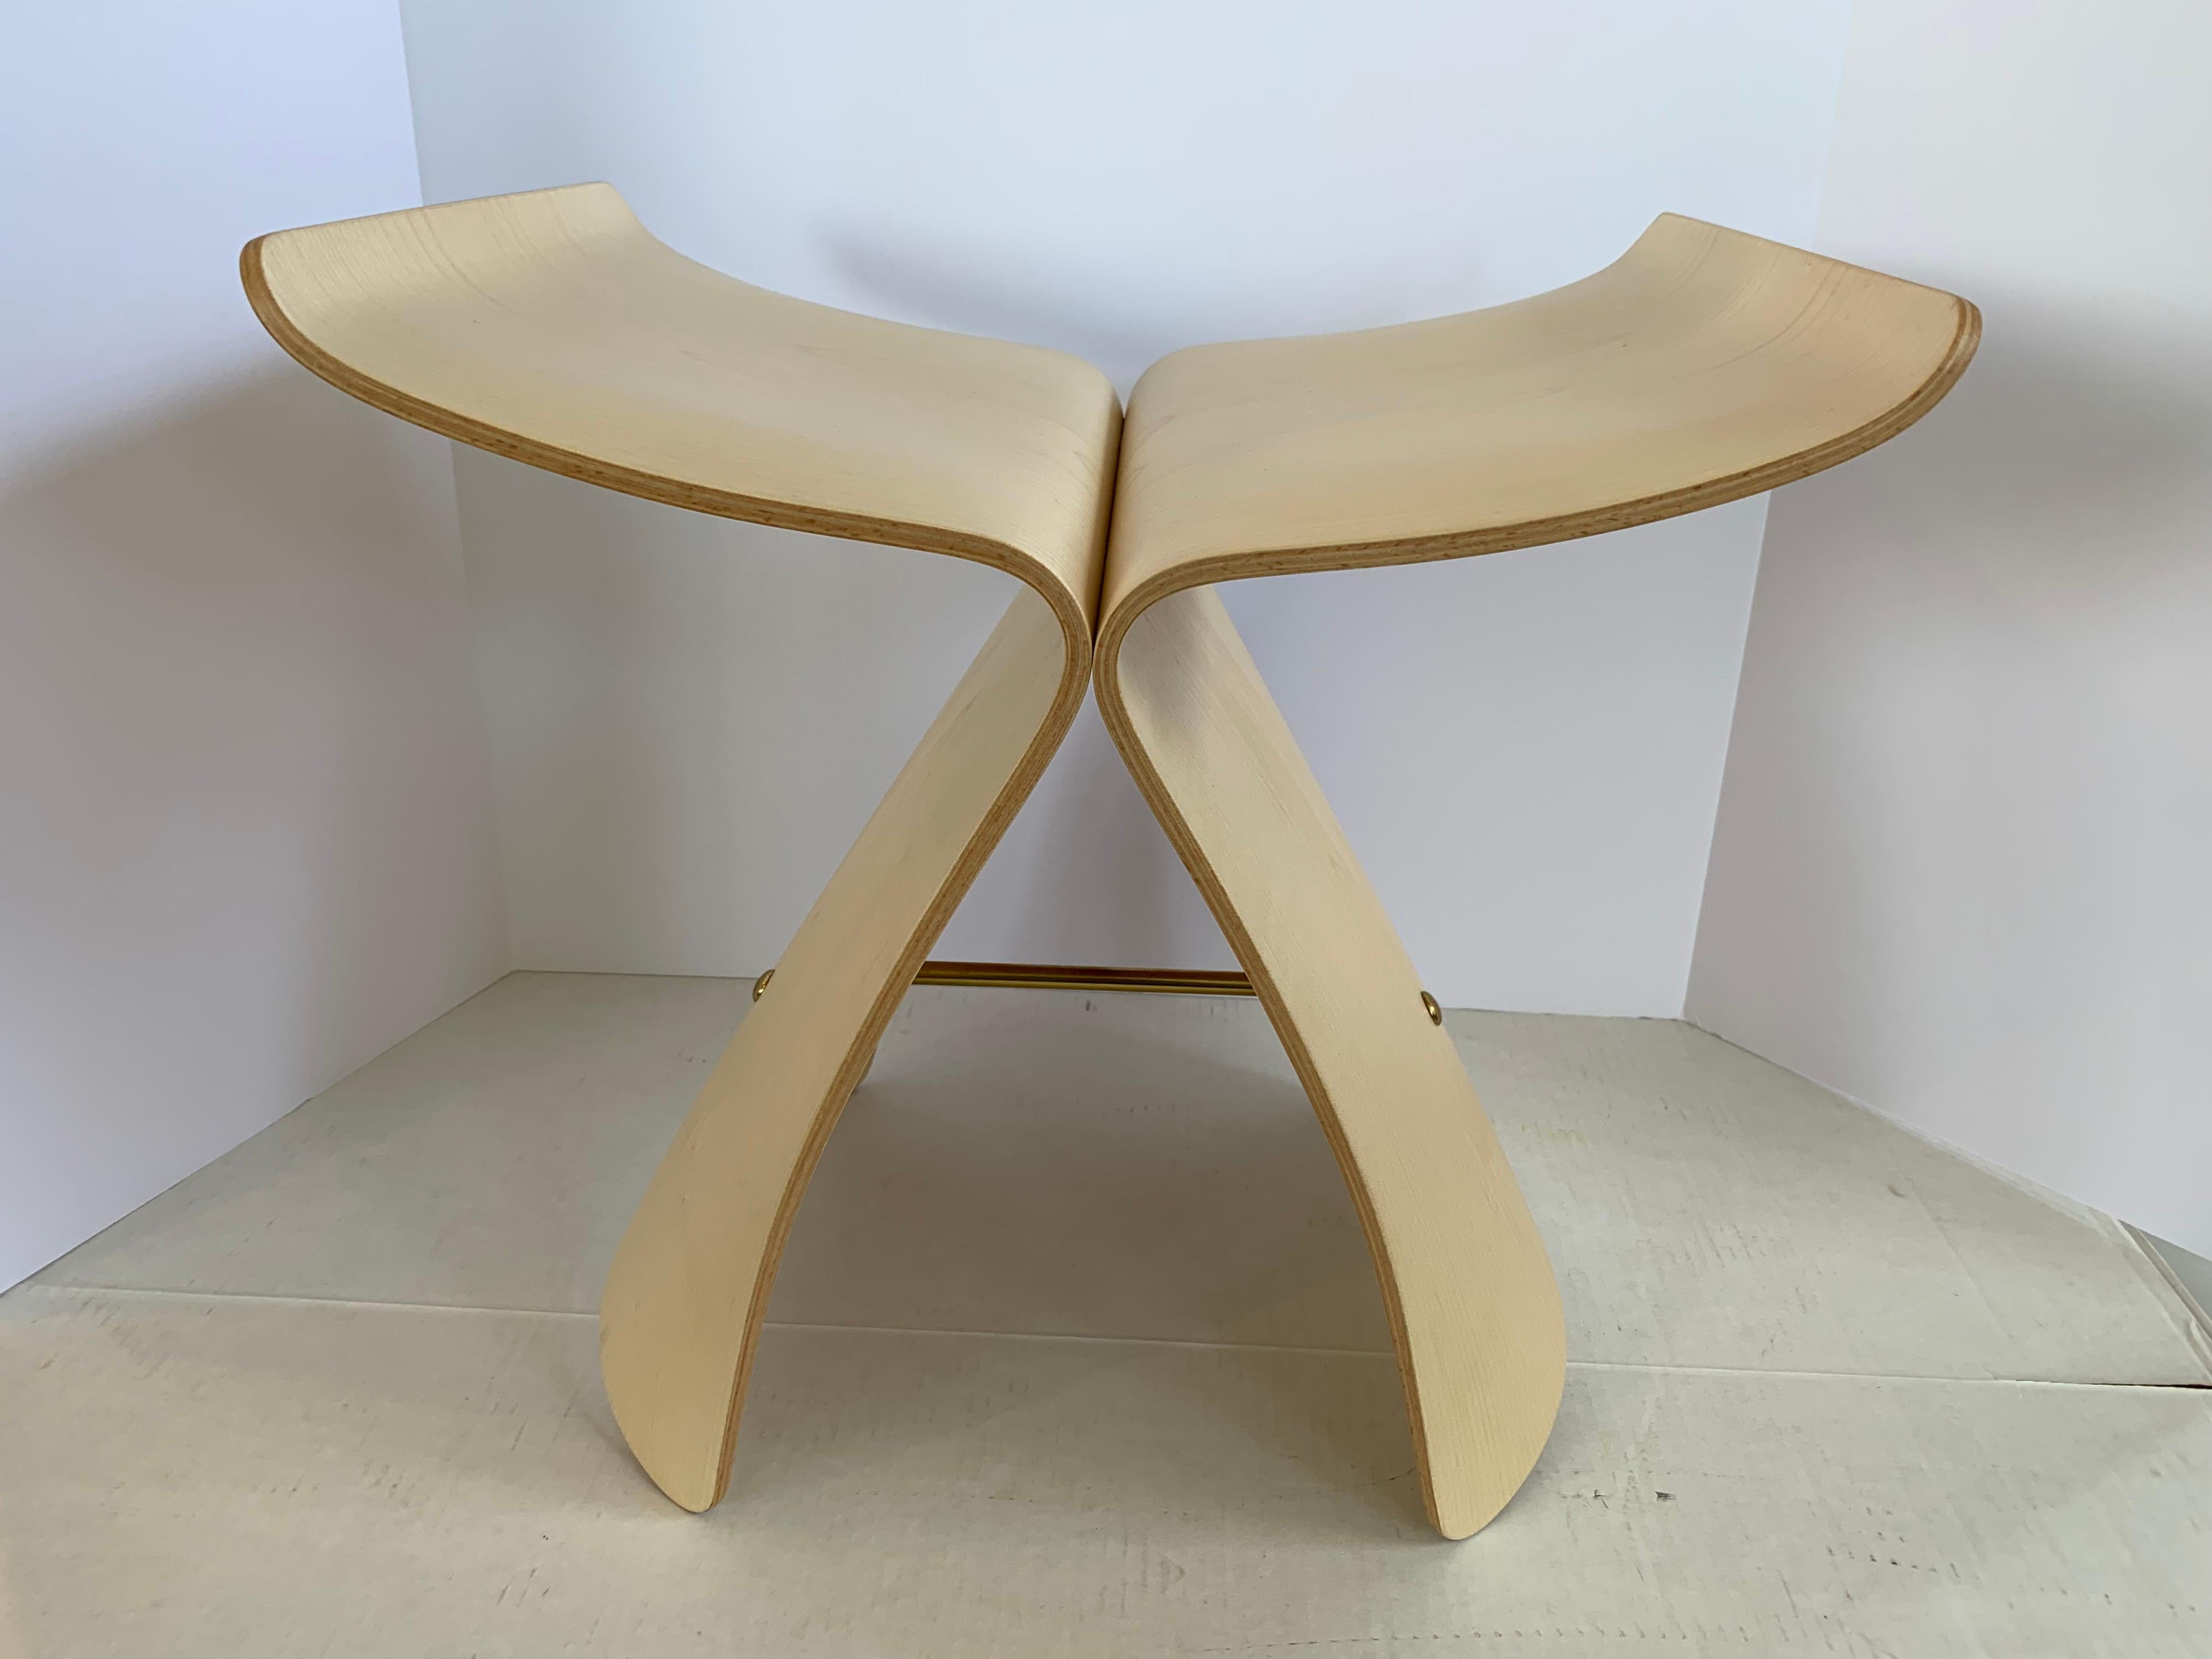 This Vitra butterfly stool combines Eastern forms with the plywood molding technique developed by Charles and Ray Eames. The gently curving silhouette is reminiscent of a butterfly‘s wings and is made of molded maple plywood with a lacquer finish